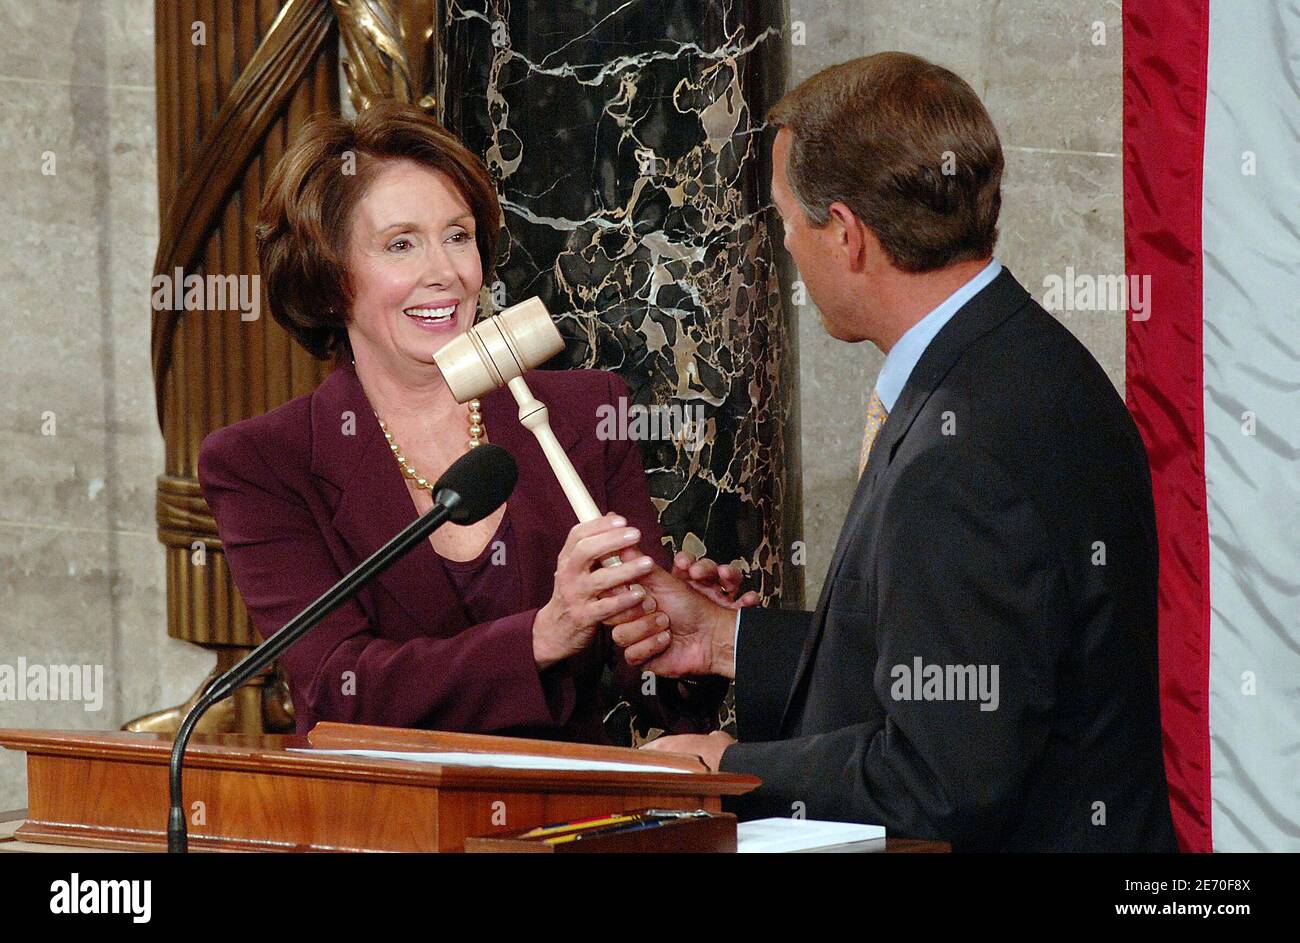 Speaker of the House Nancy Pelosi (D-CA) receives the Speaker's gavel after being elected as the first woman Speaker during a swearing in ceremony for the 110th Congress in the House Chamber of the U.S. Capitol, on January 4, 2007 in Washington, DC, USA. Pelosi will lead House Democrats as the Democratic Party takes control of both houses of Congress. Photo by Olivier Douliery/ABACAPRESS.COM Stock Photo